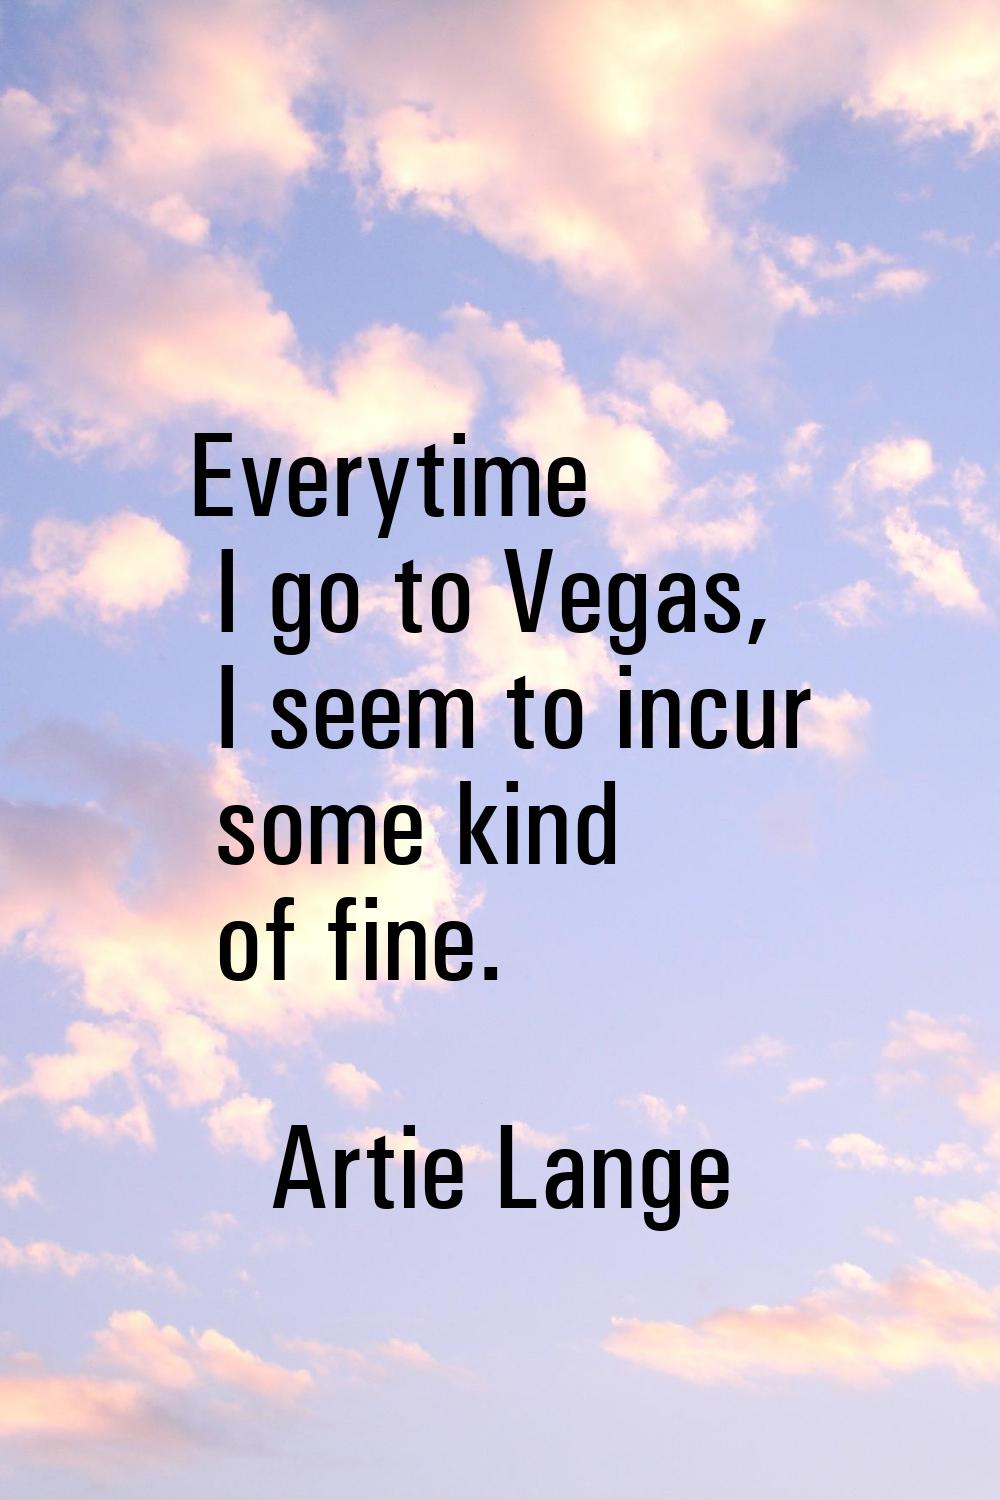 Everytime I go to Vegas, I seem to incur some kind of fine.